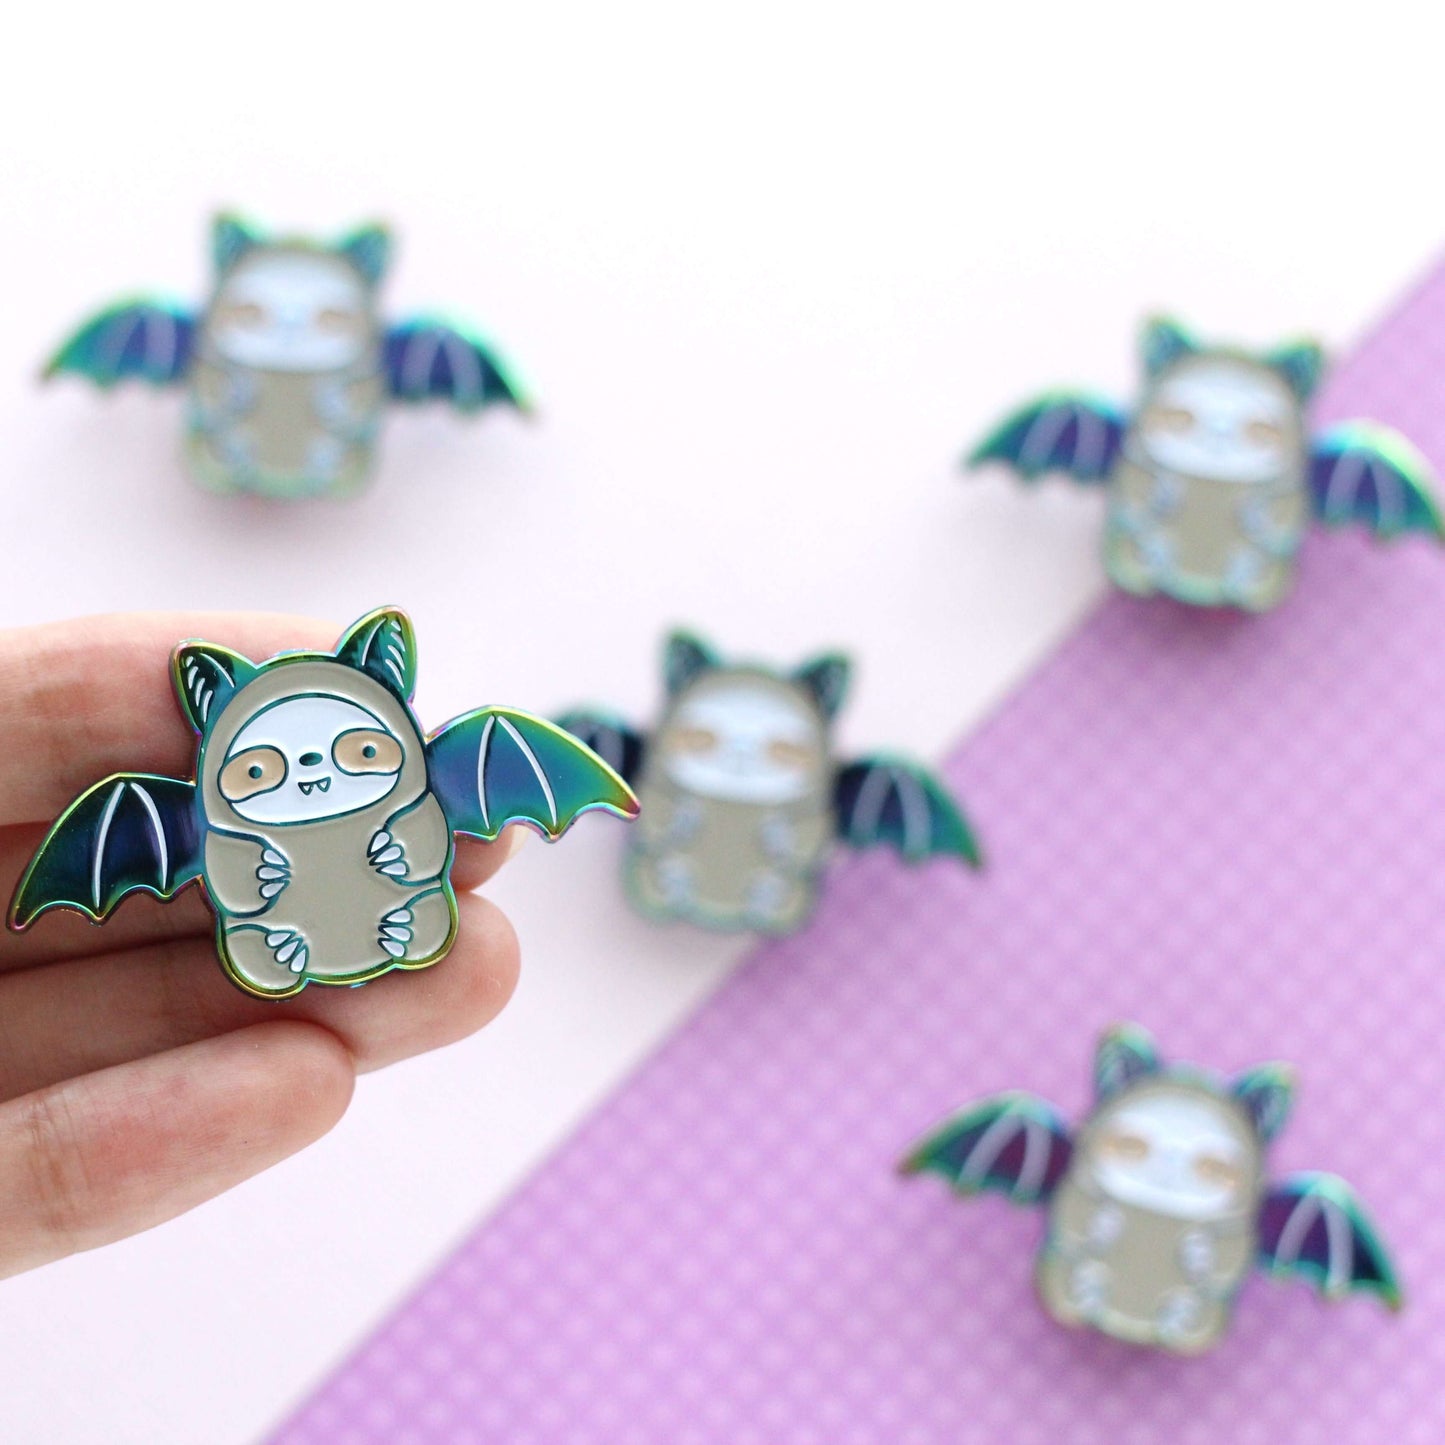 Bat Sloth Enamel Pin - Sloth Gift - Halloween Pin - Monster Accessory by Wild Whimsy Woolies